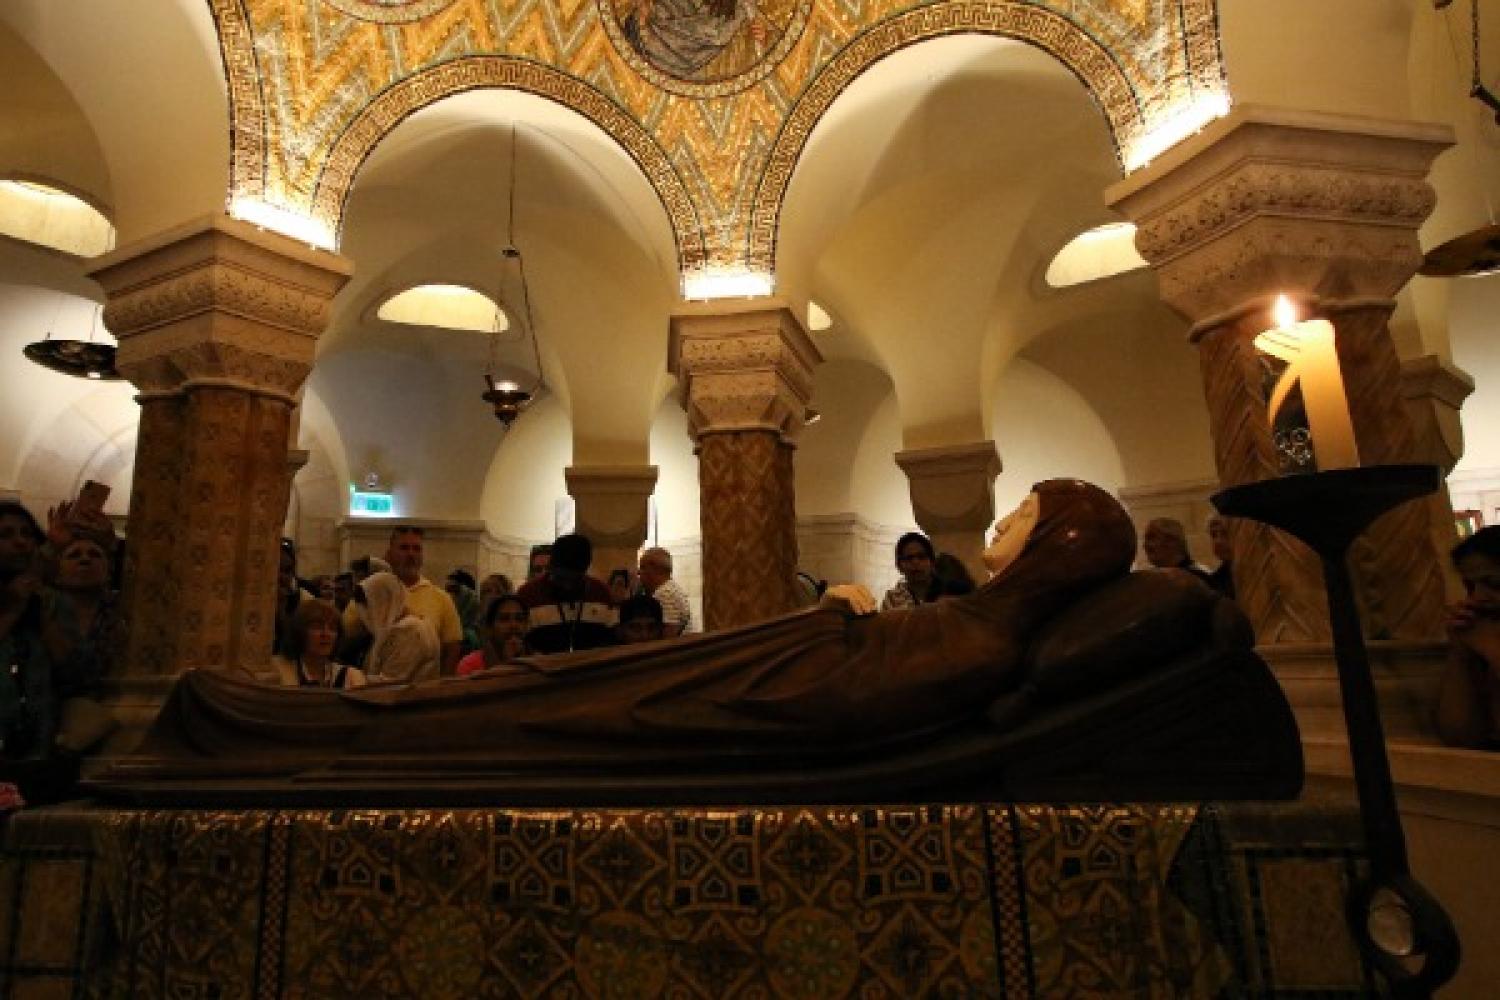 A statue of Our Lady in repose in the crypt of the Abbey of the Dormition